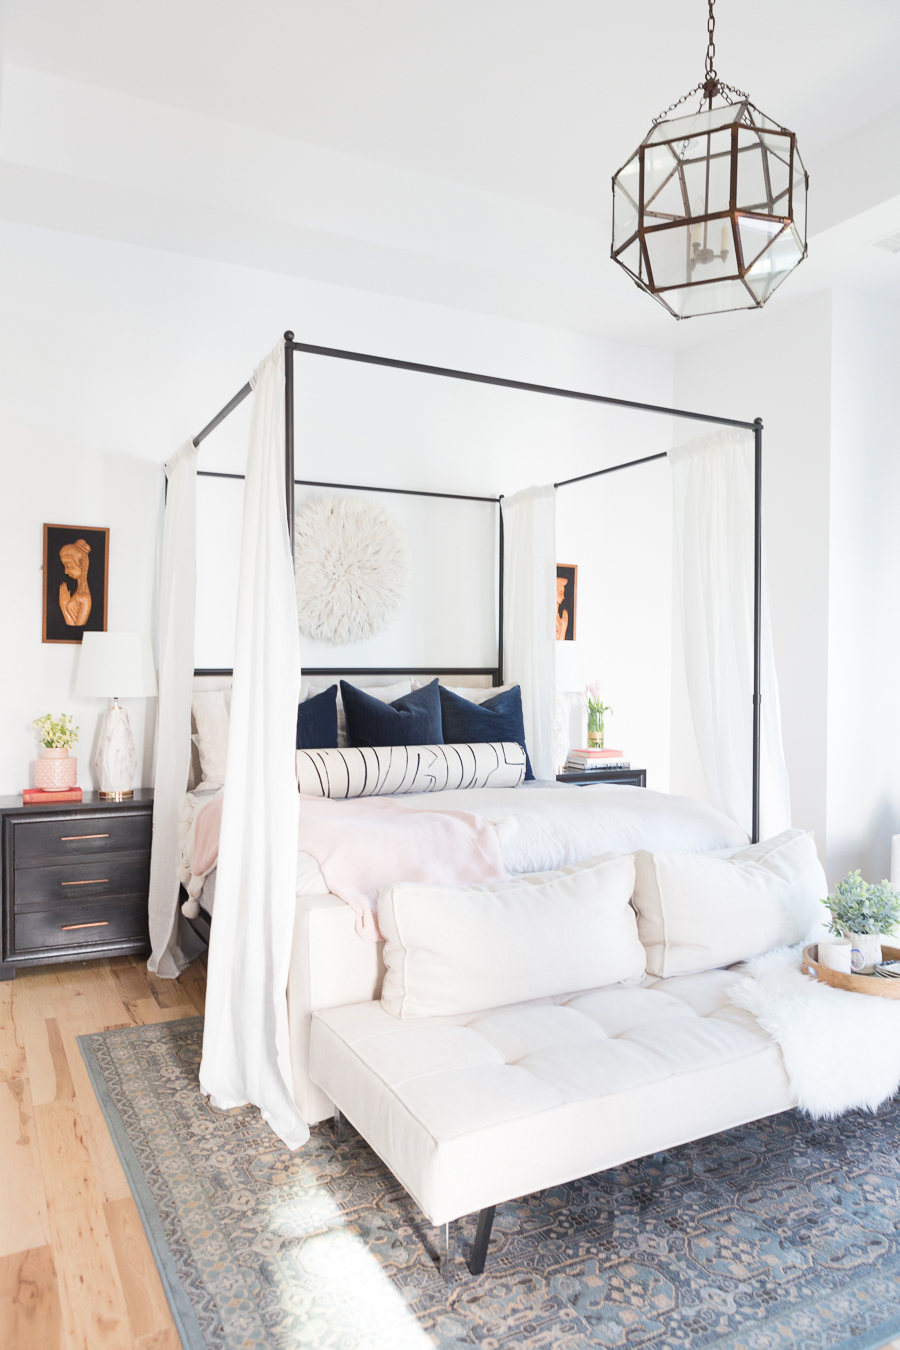 How to Decorate Your Home on a Budget from World Market affordable canopy beds